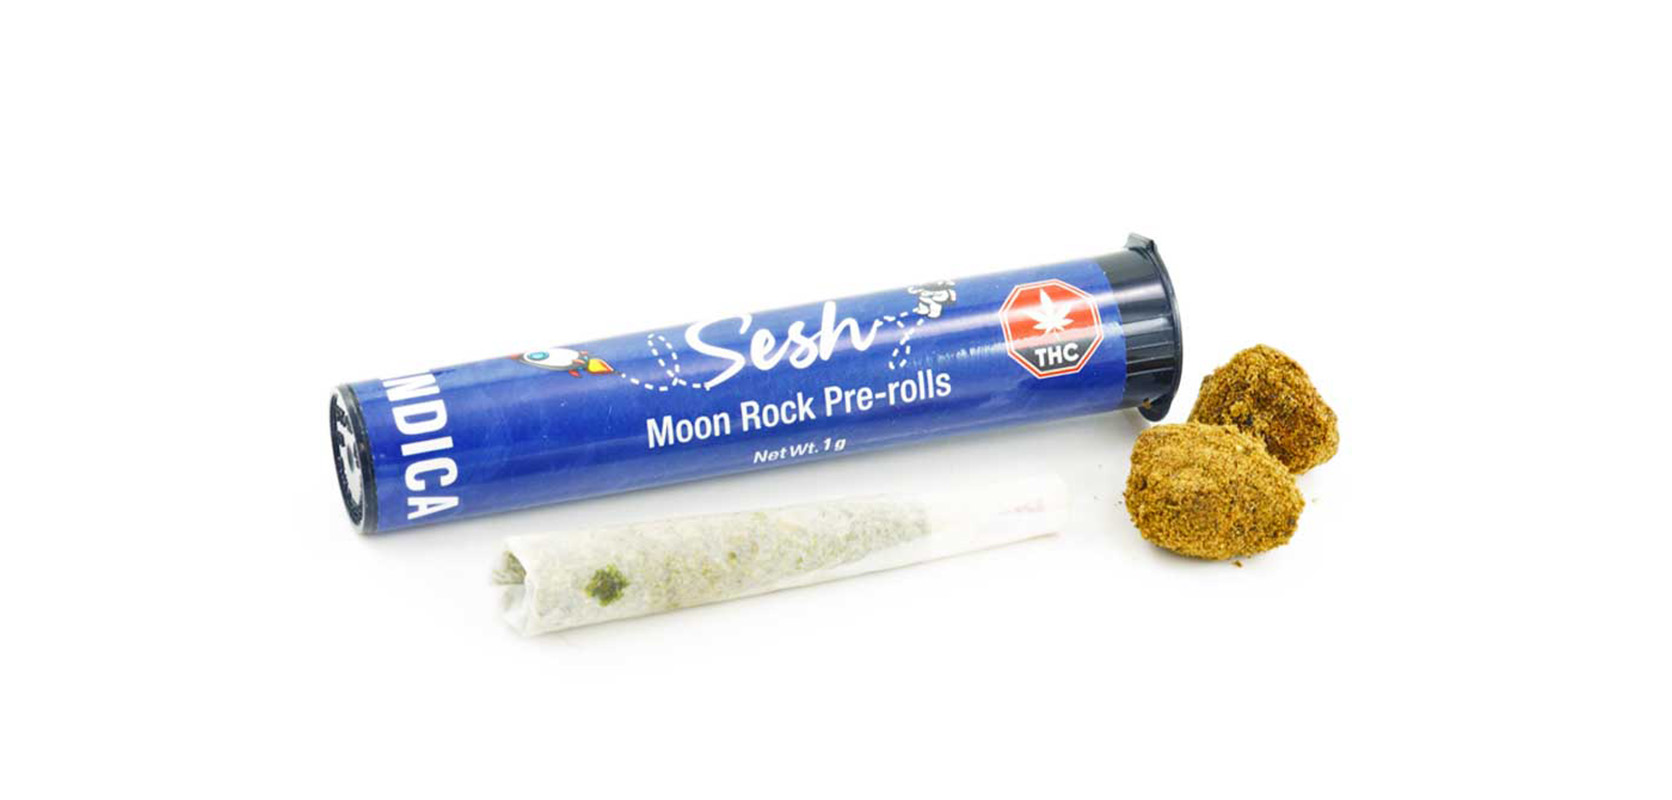 moon rock preroll joints from low price bud cheapweed dispensary.